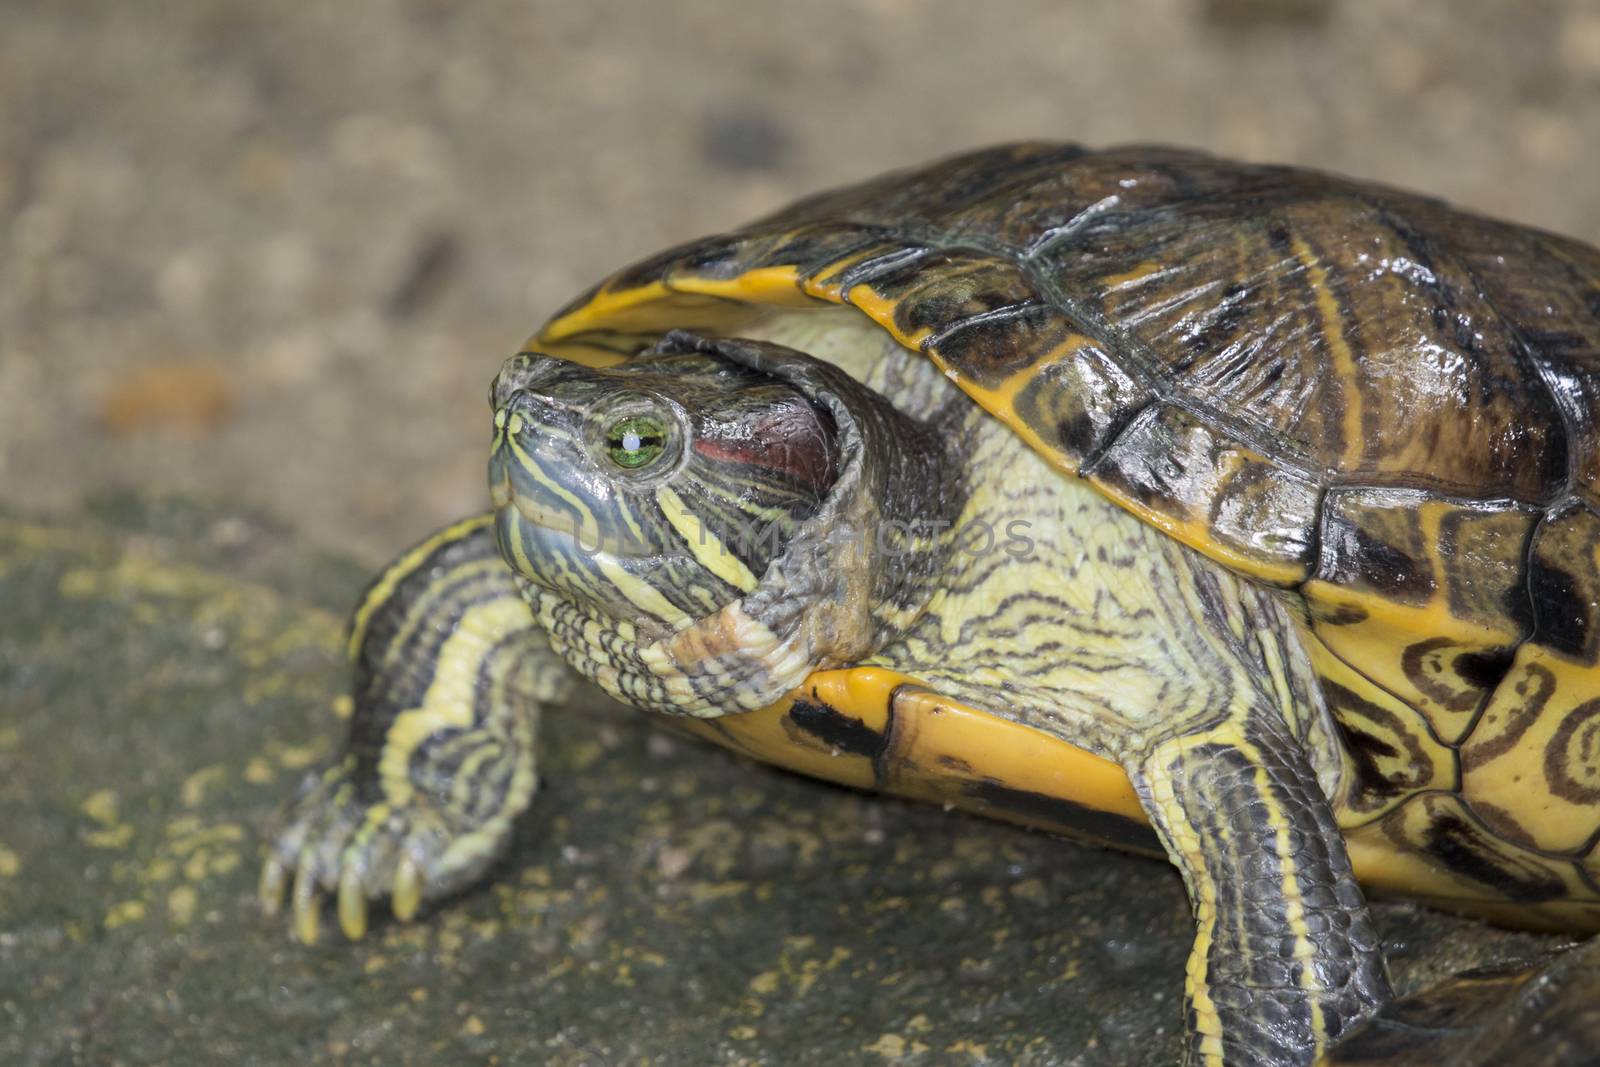 Image of an eastern chicken turtle in thailand by yod67